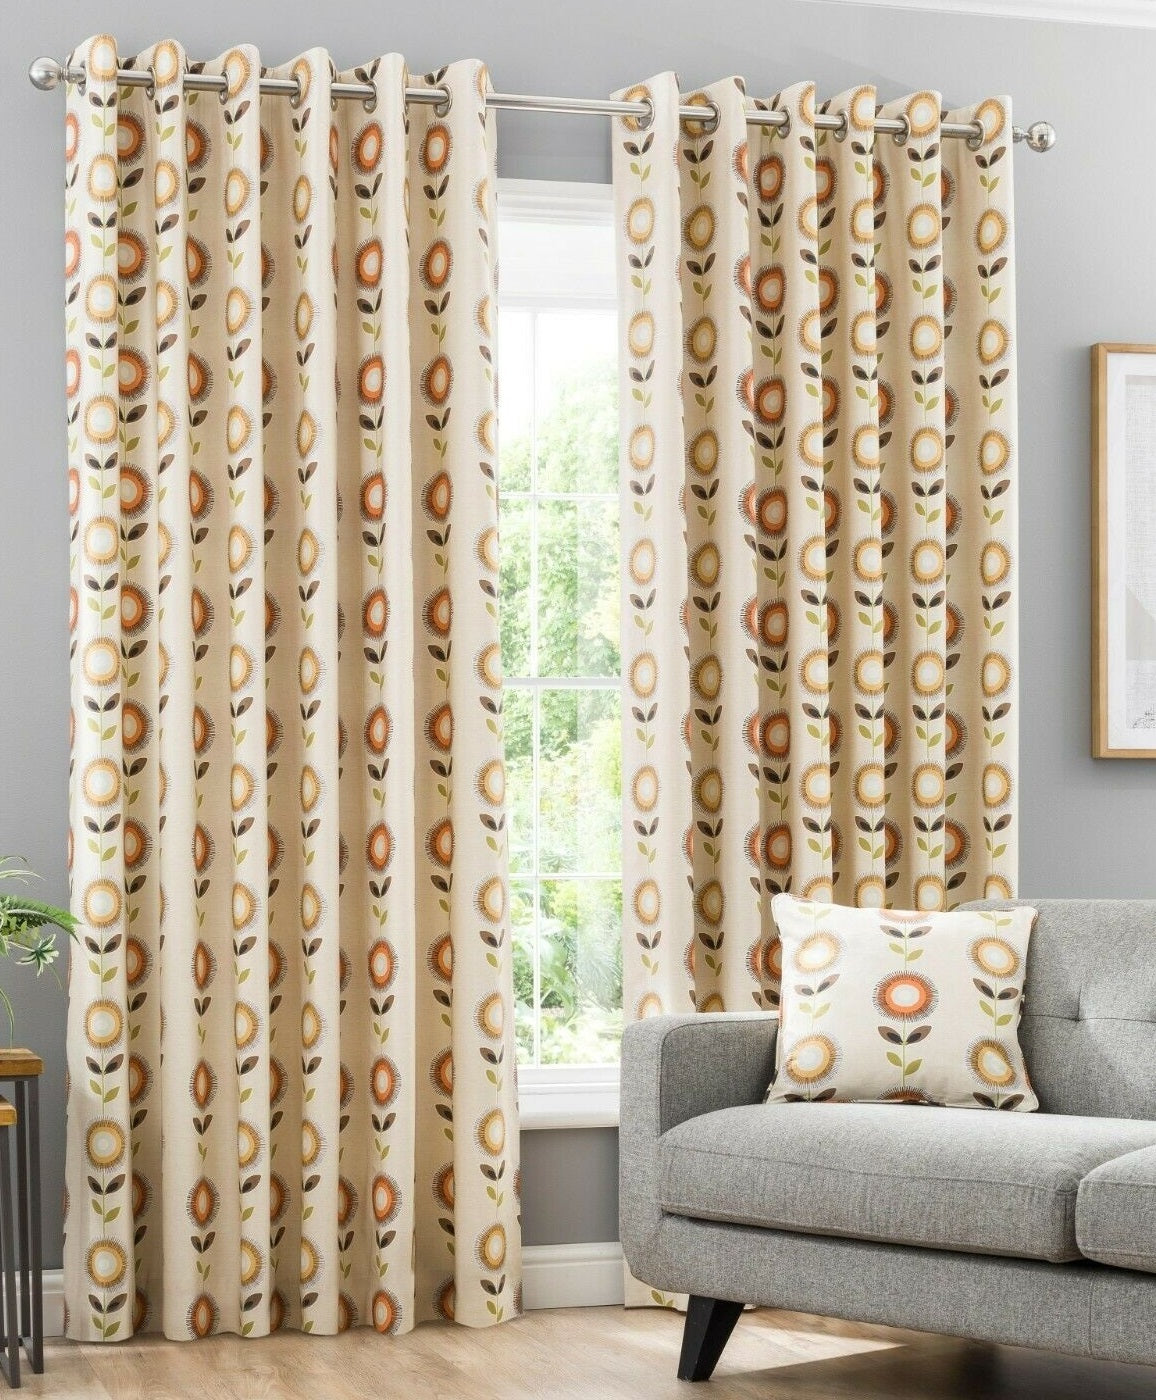 Tivoli Floral Eyelet Ring Top Lined Curtains 66" x 90"